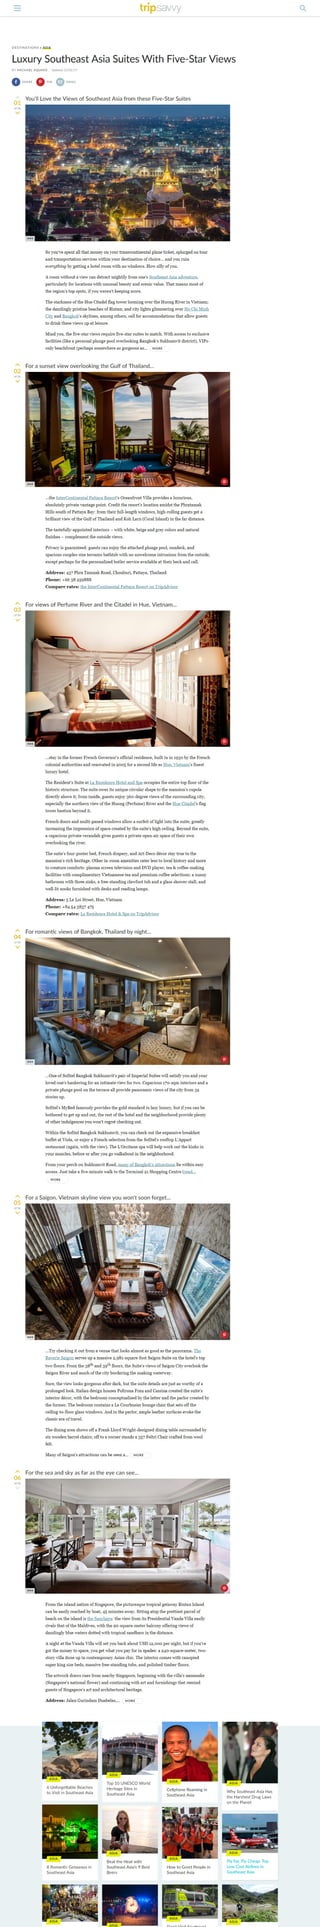 La Residence's Resident Suite among 'Luxury Southeast Asia Suites With Five-Star Views', Tripsavvy